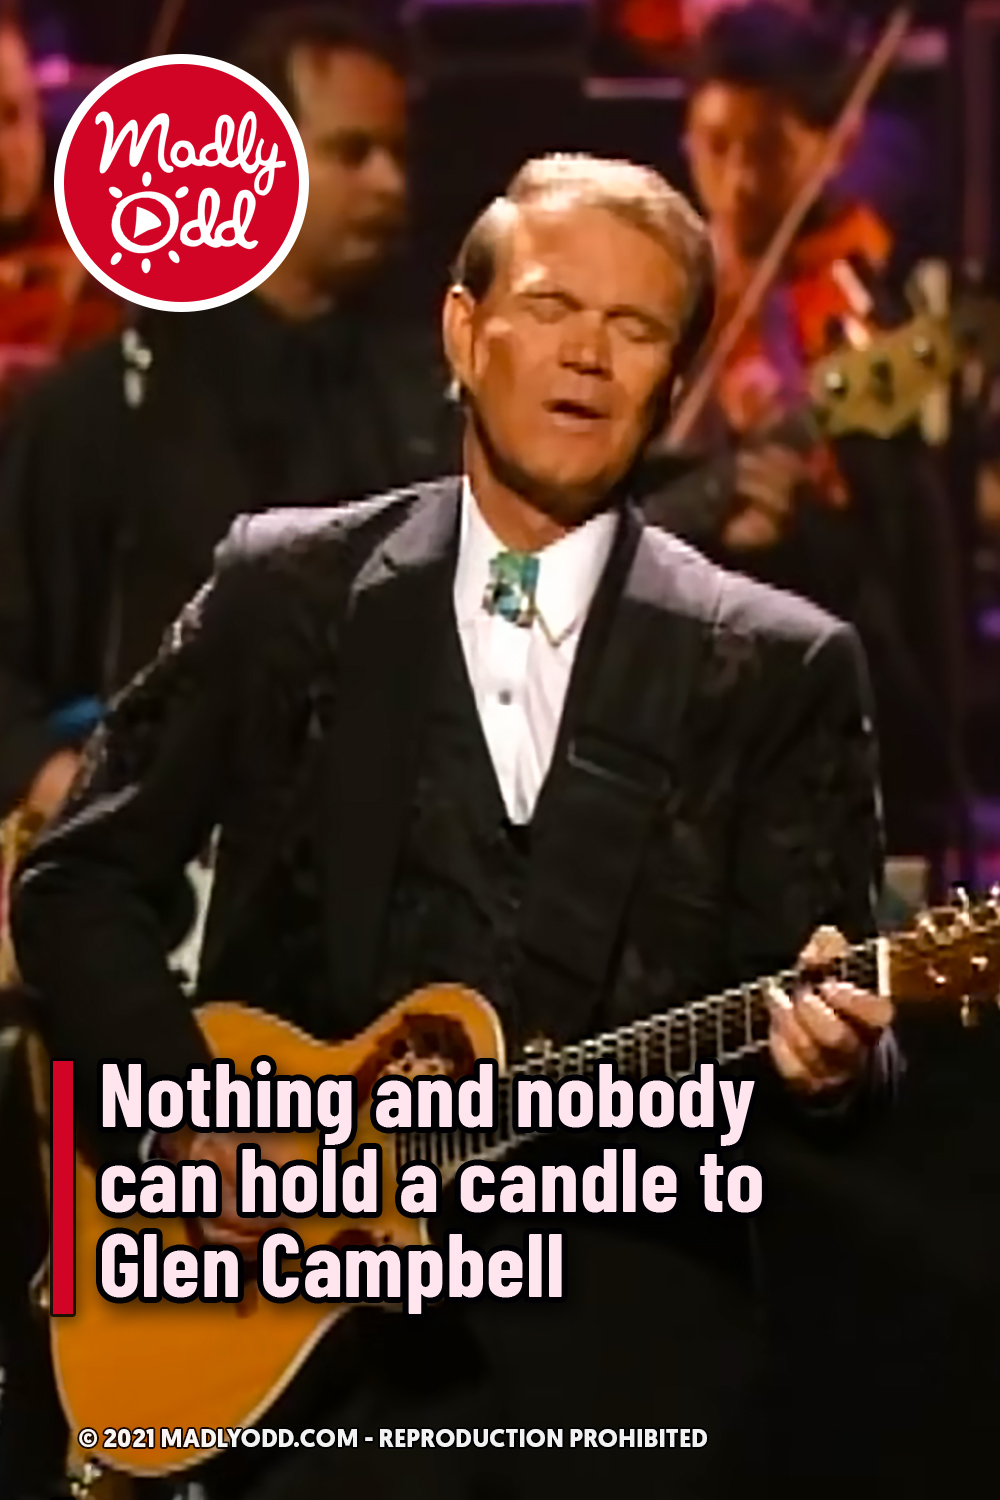 Nothing and nobody can hold a candle to Glen Campbell